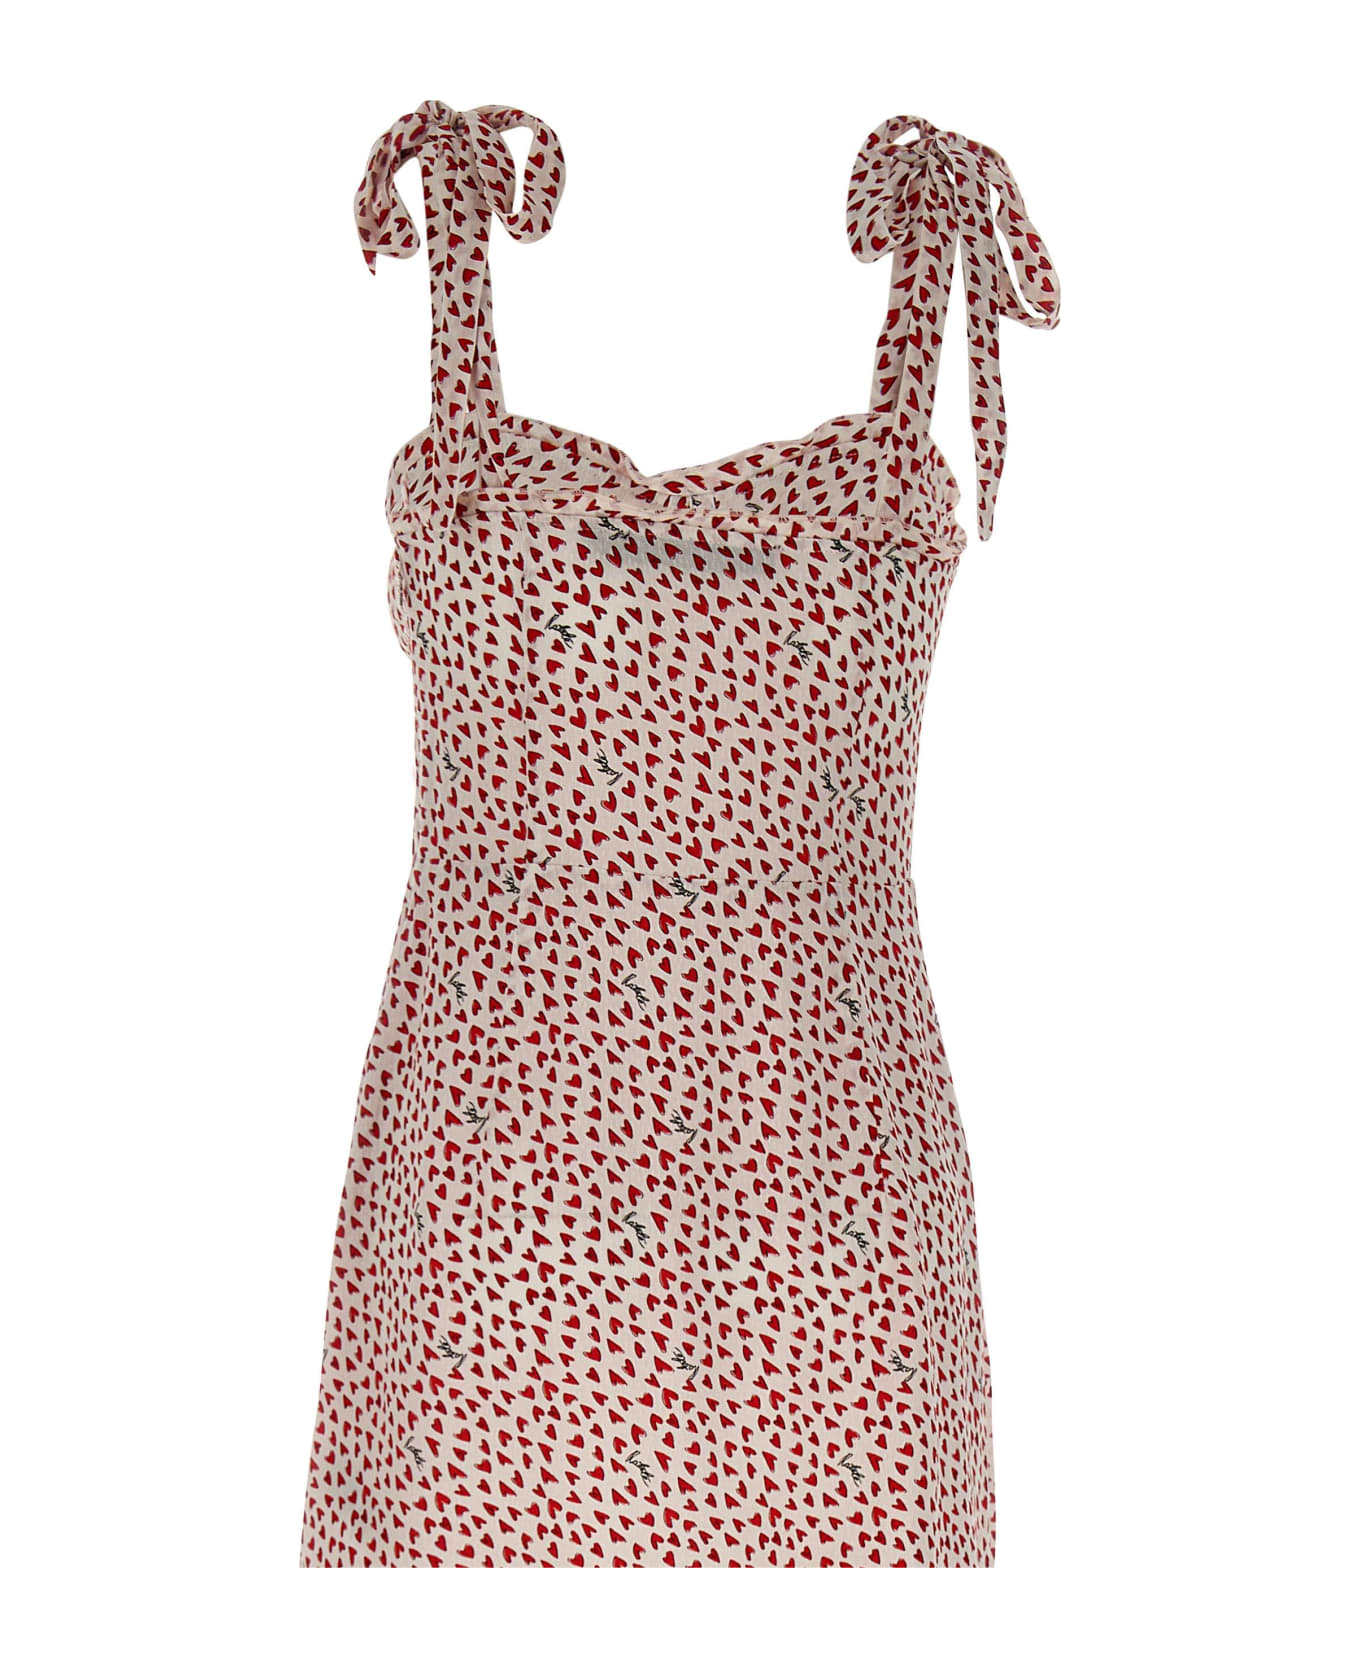 Rotate by Birger Christensen "printed Mini Ruffle" Crepe Dress - RED/white